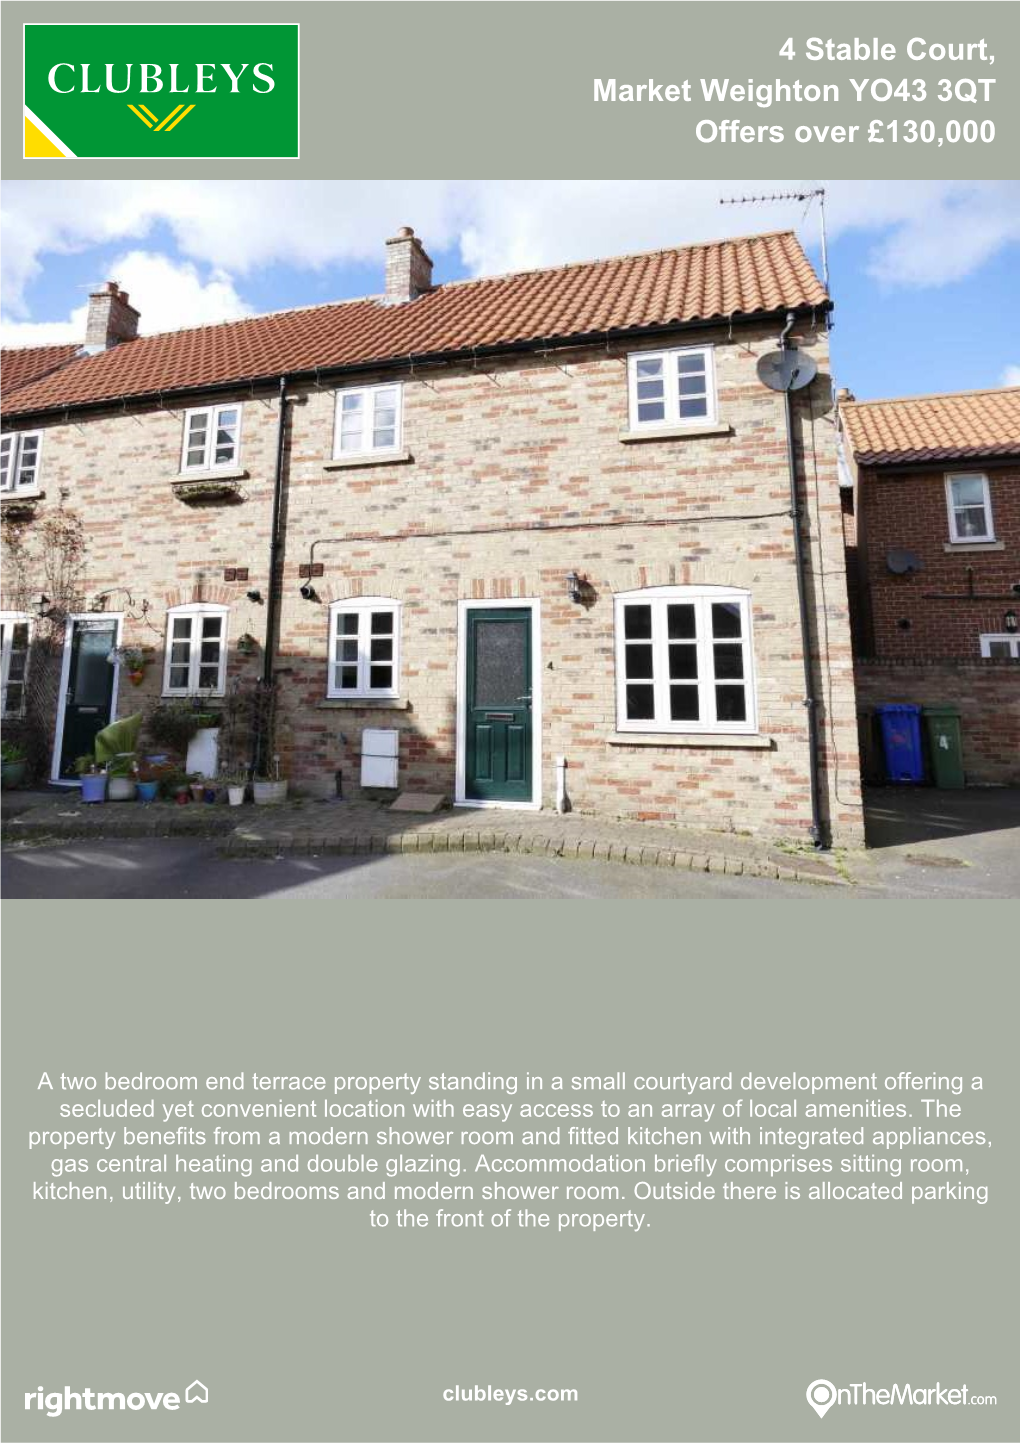 4 Stable Court, Market Weighton YO43 3QT Offers Over £130,000